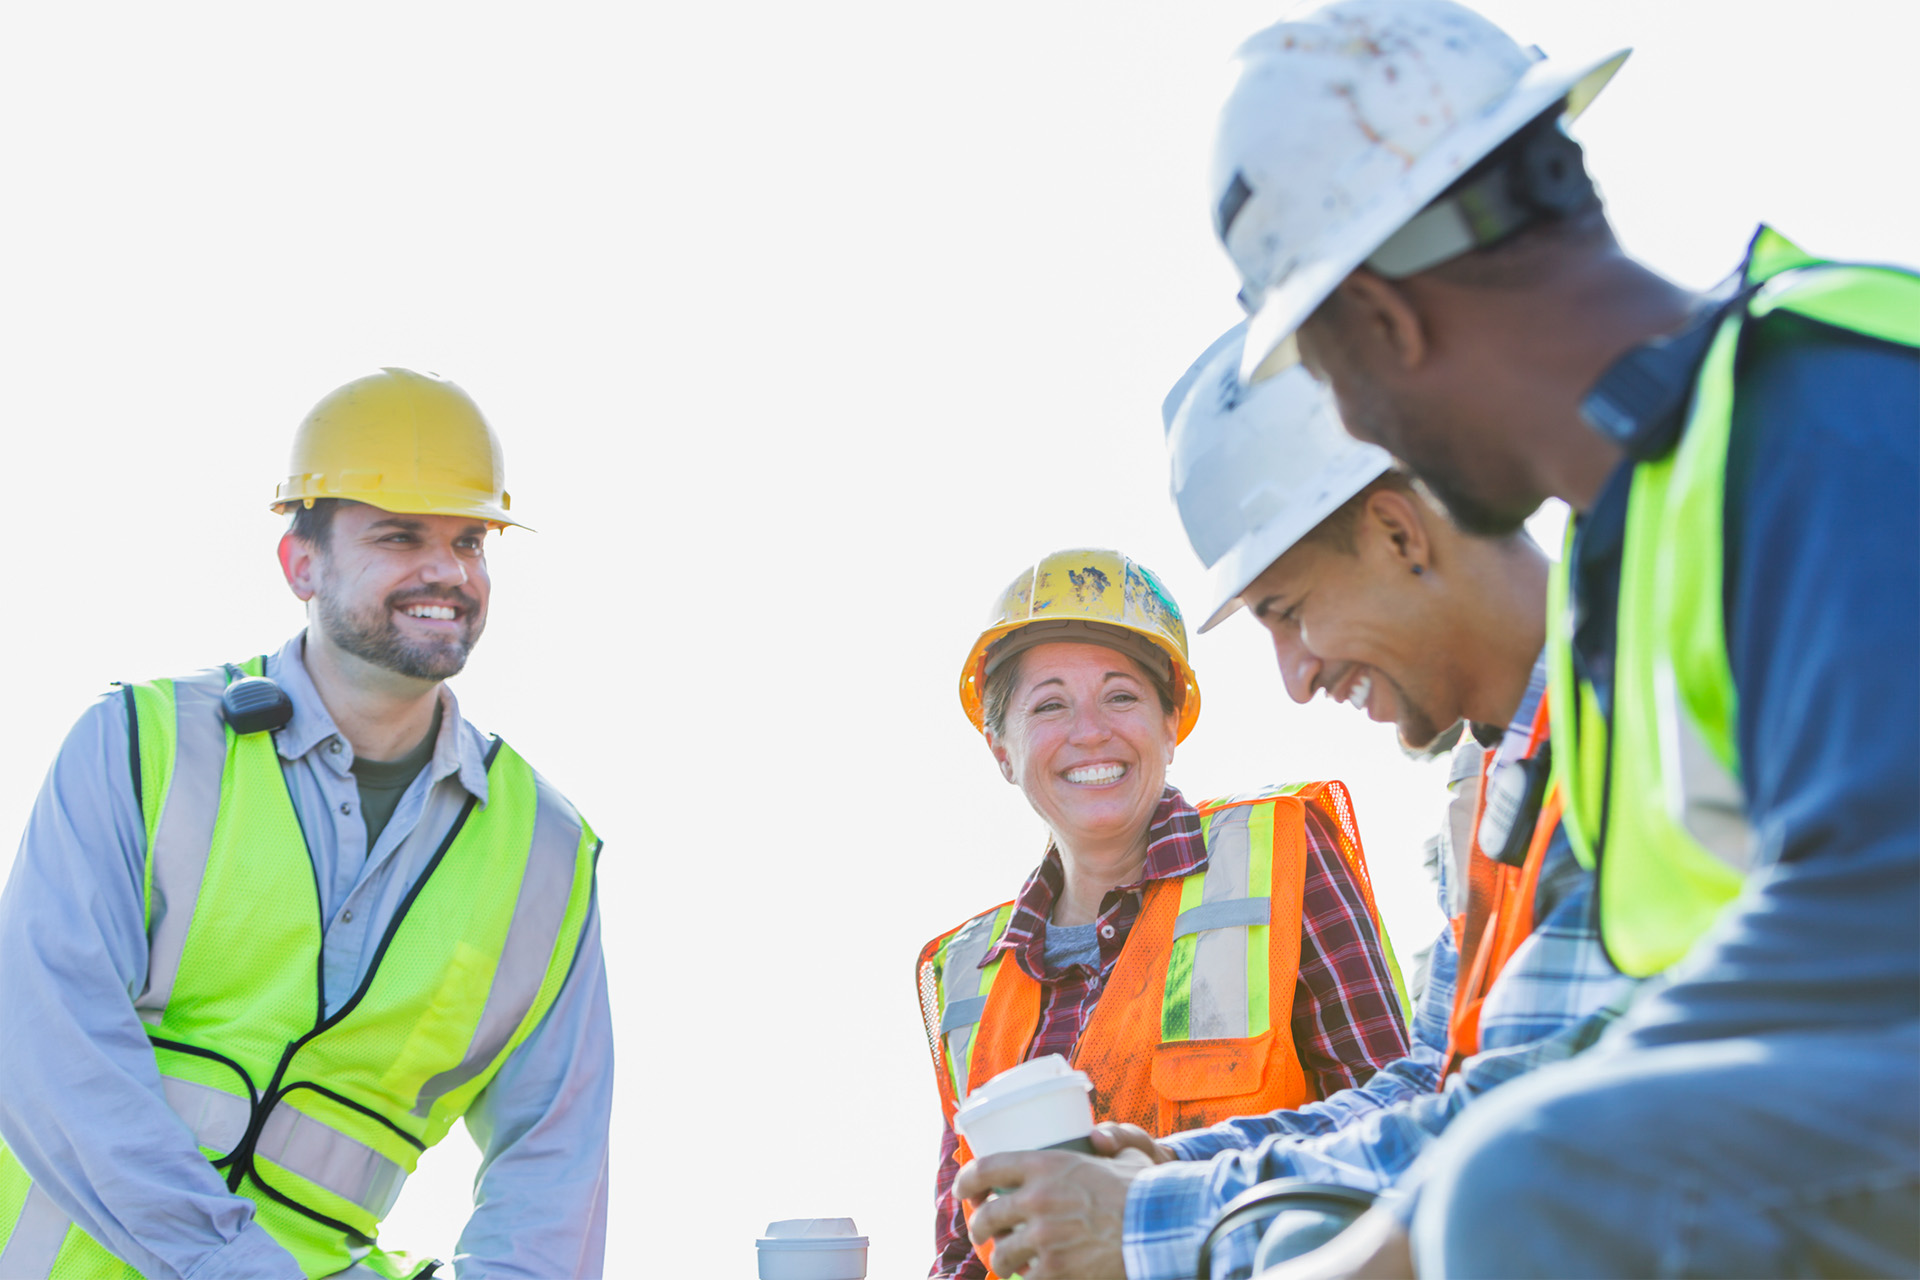 A multi-ethnic group of workers, a woman and three men, wearing safety vests and hardhats taking a coffee break.